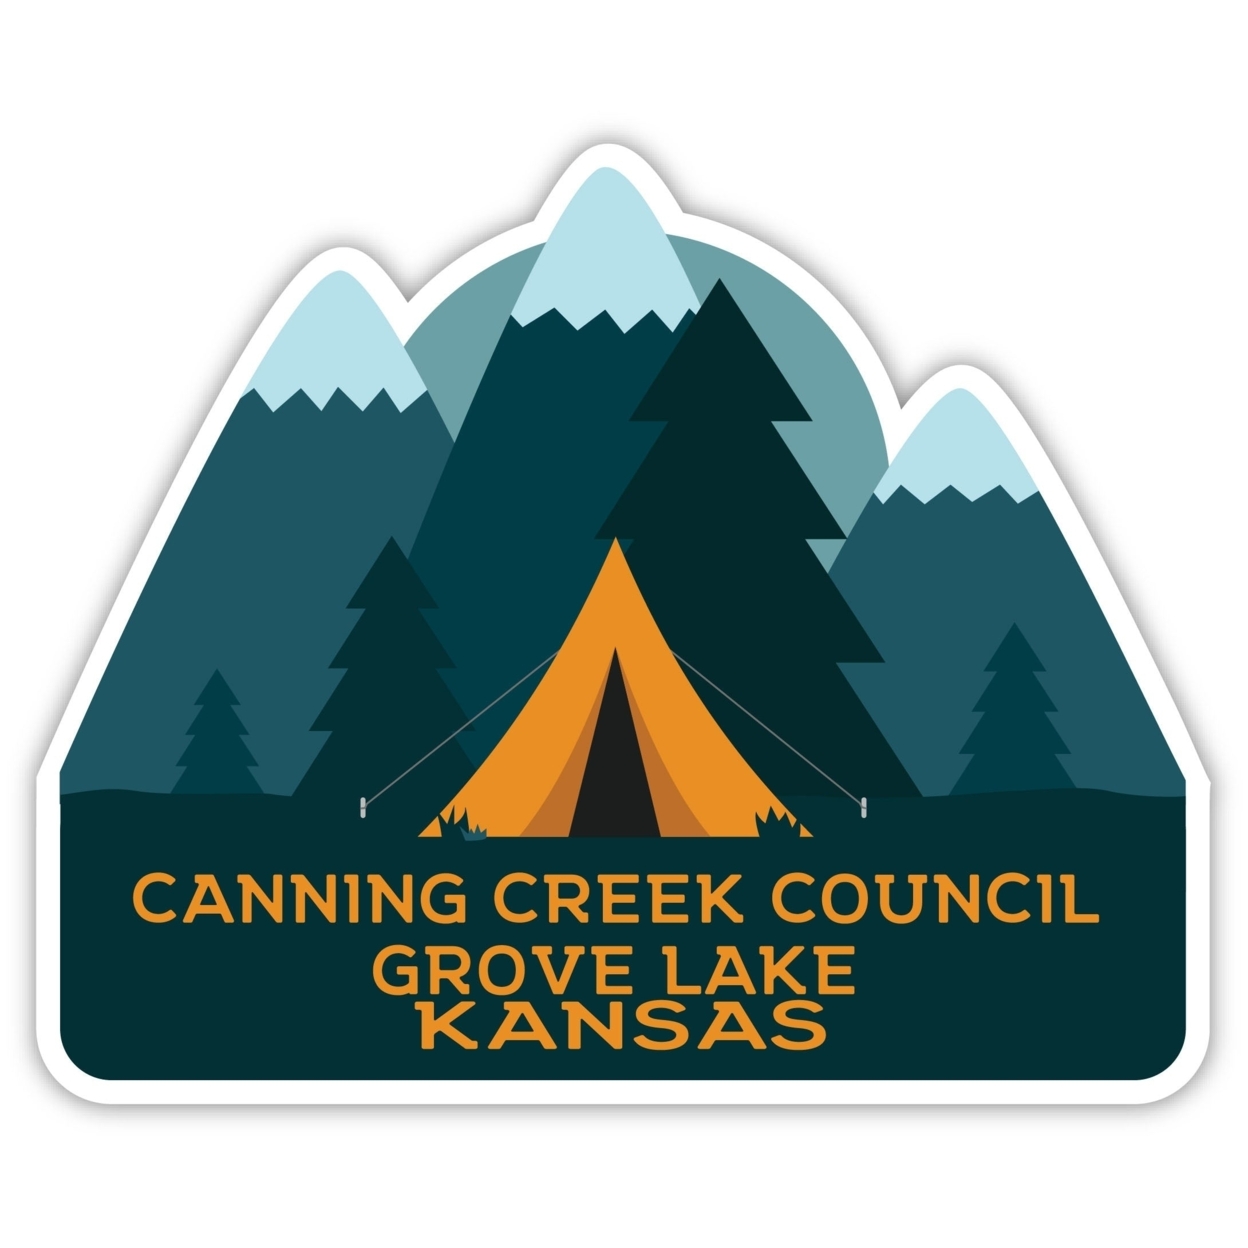 Canning Creek Council Grove Lake Kansas Souvenir Decorative Stickers (Choose Theme And Size) - 4-Pack, 8-Inch, Tent